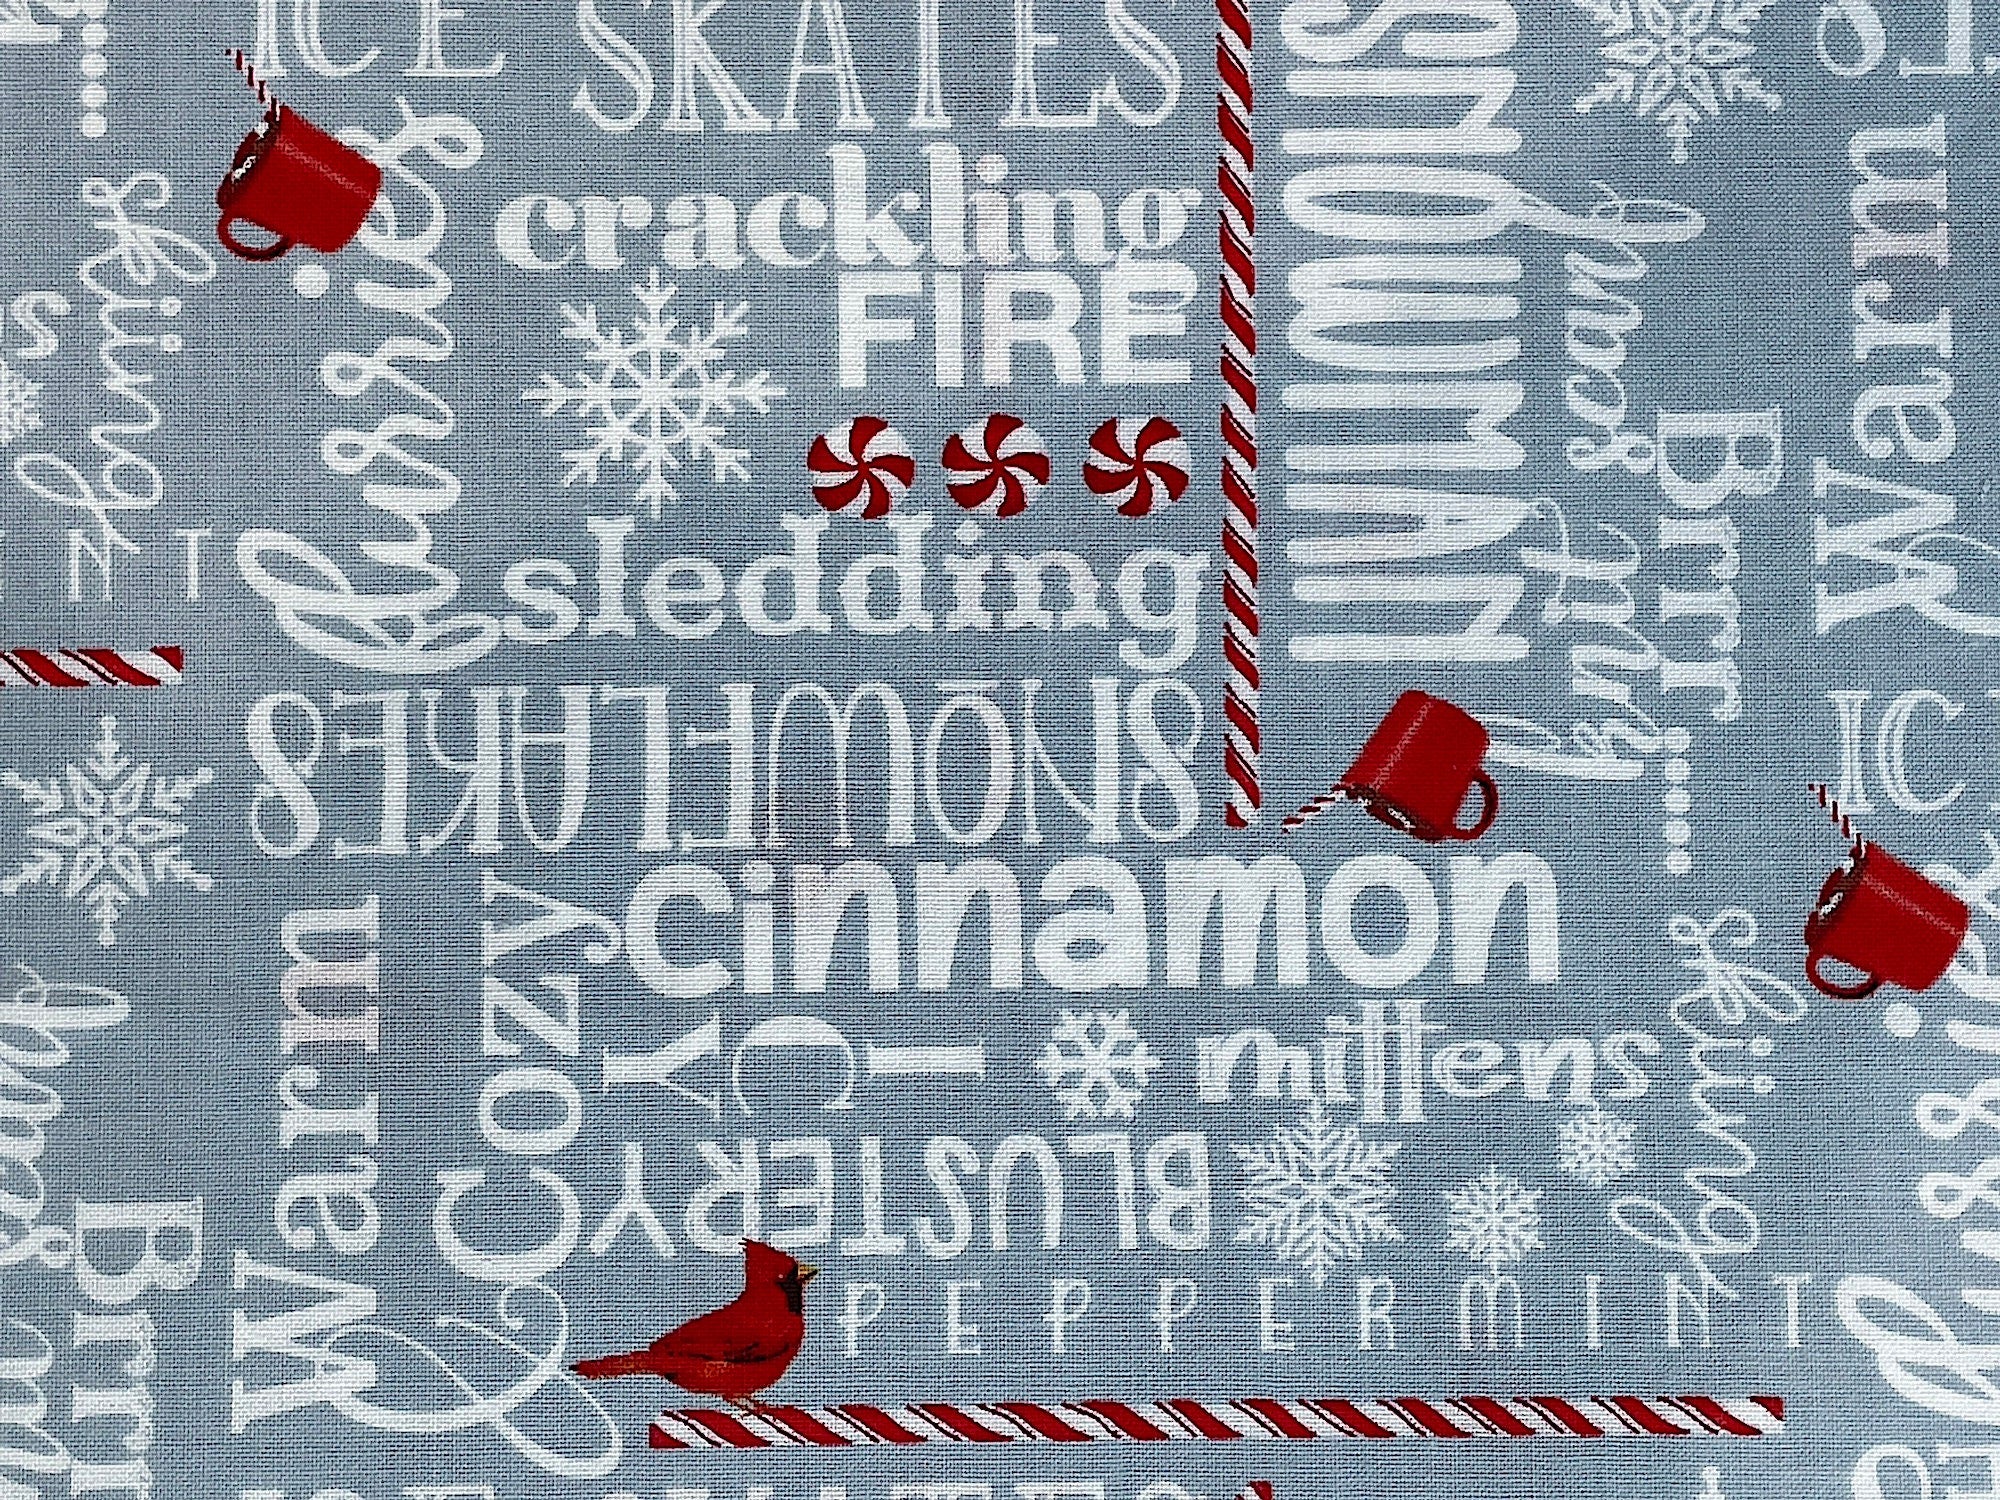 This gray cotton fabric is covered with winter words such as snowman, cinnamon, mittens, peppermint, crackling fire, ice skates and more. You will also find small red birds and red cups of cocoa throughout the fabric along with peppermint sticks.